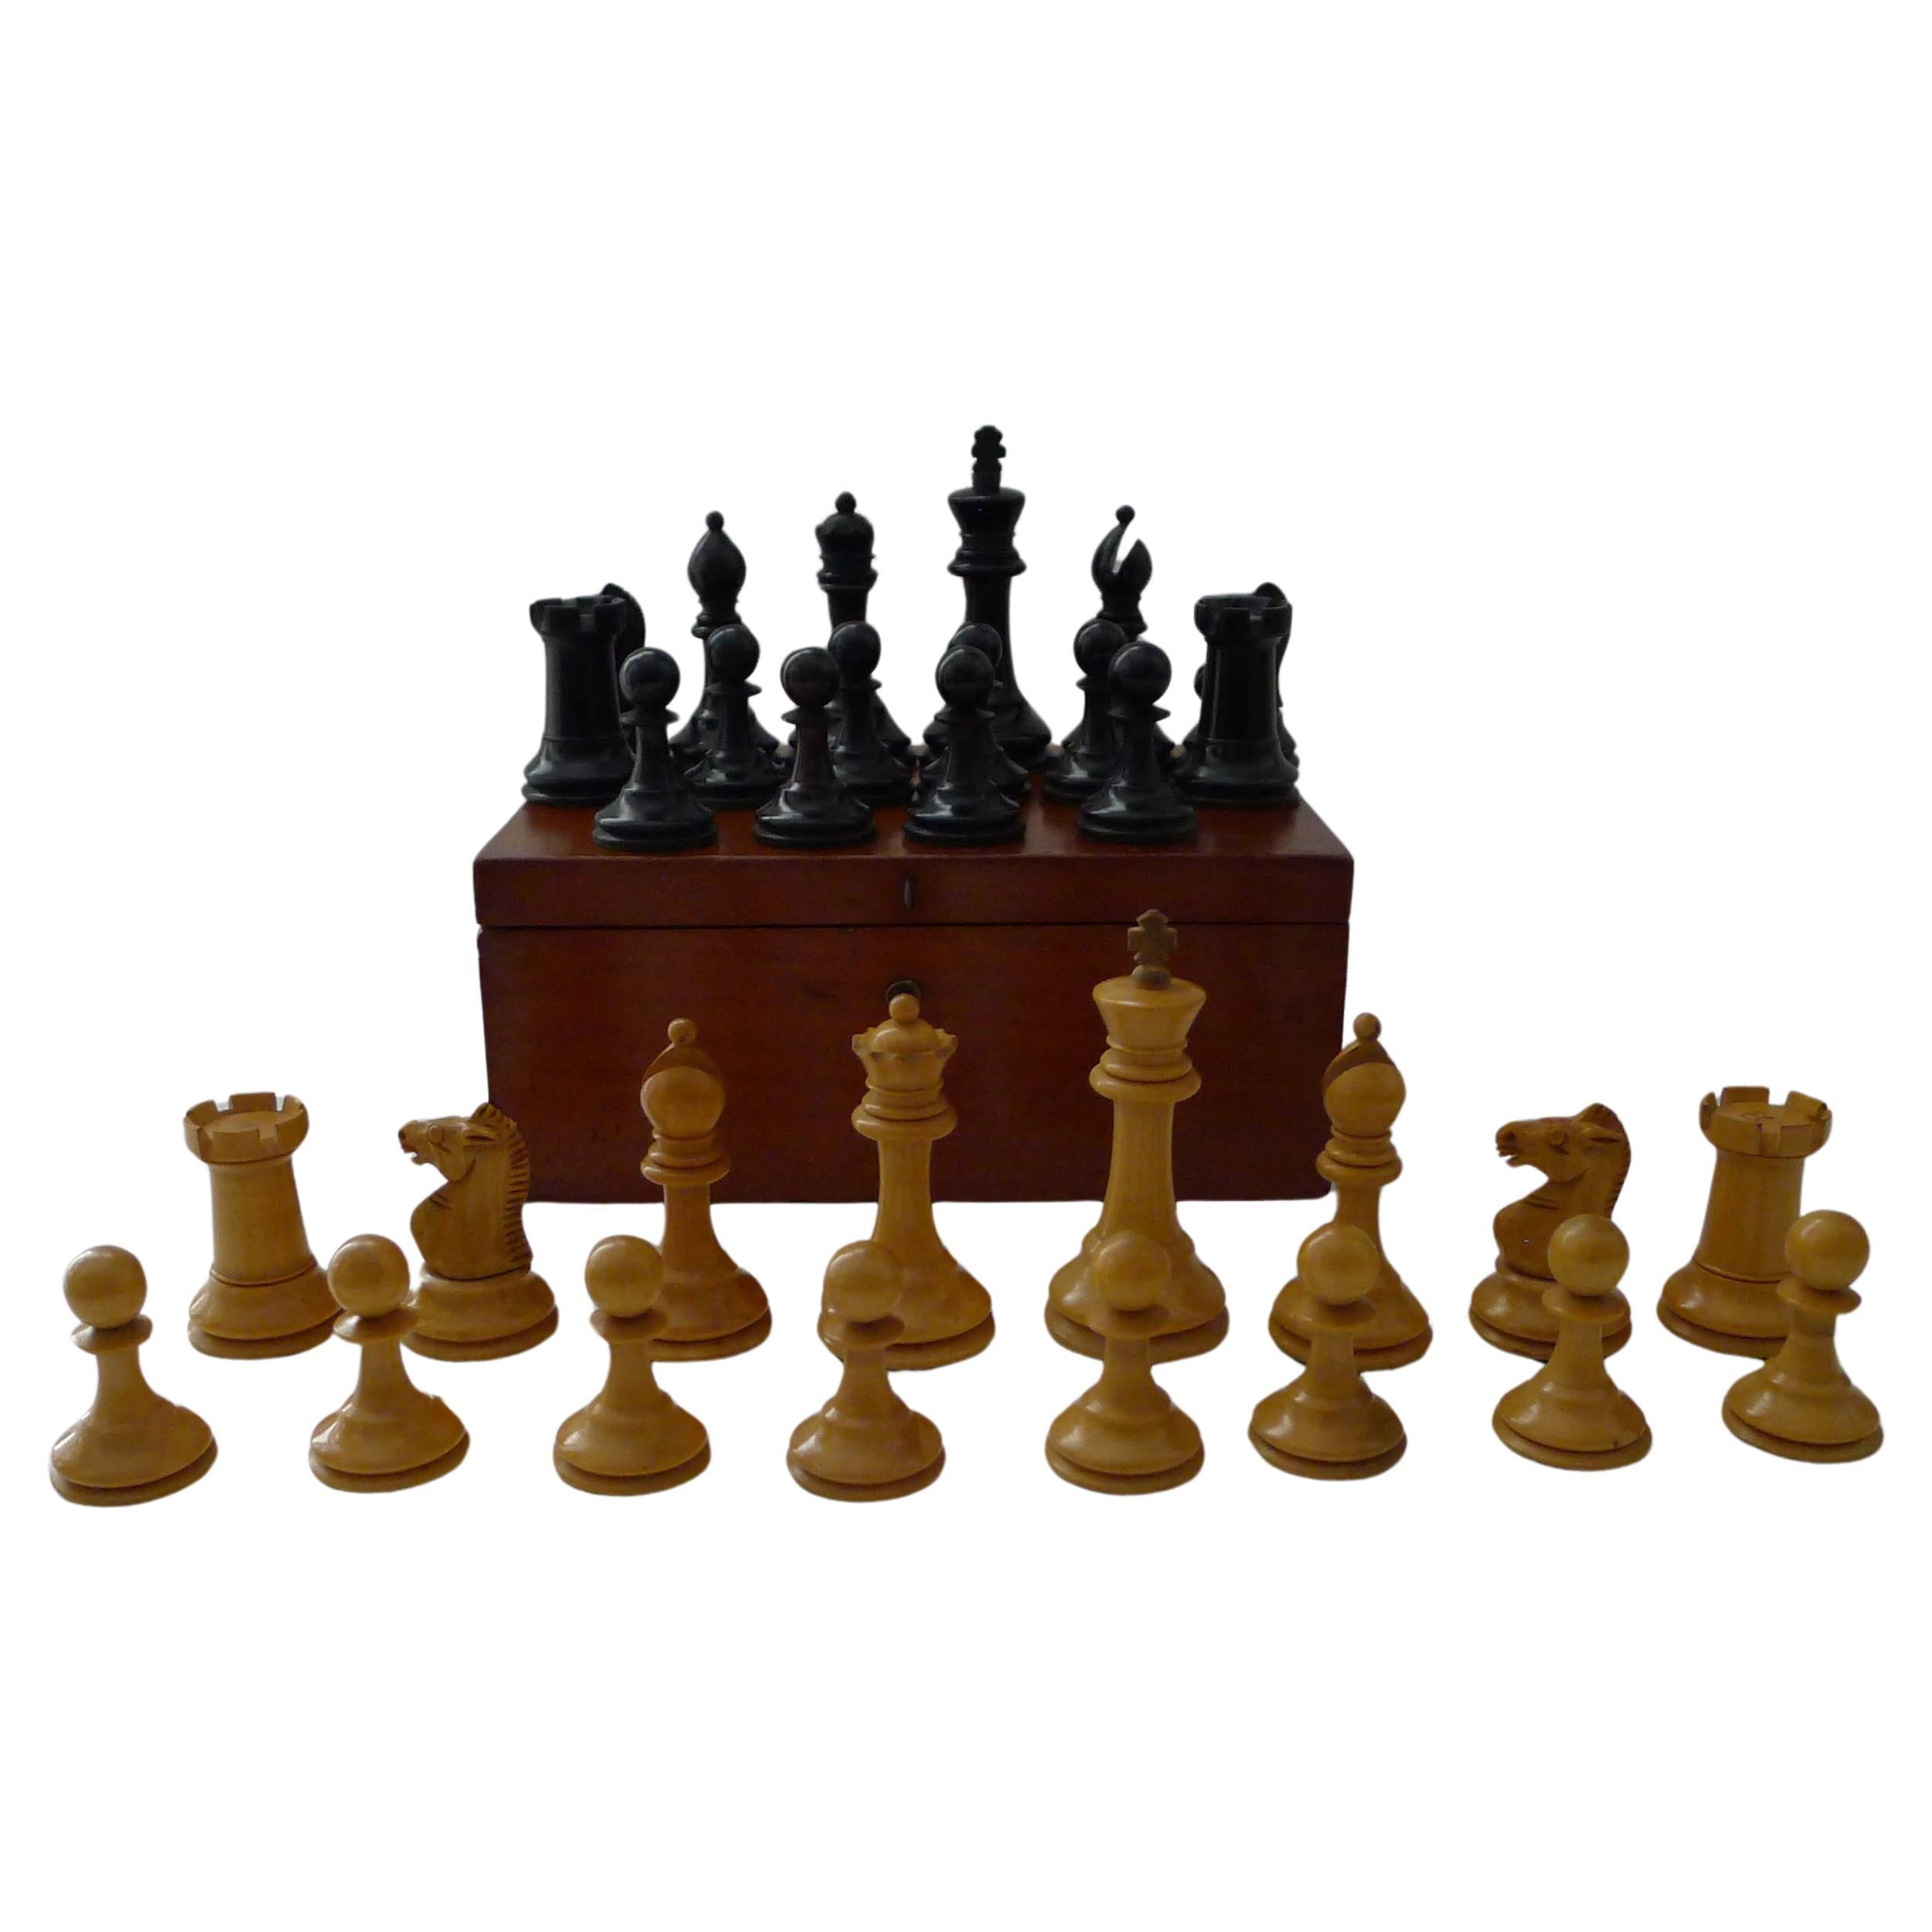 Antique English Staunton Chess Set With Red Crown Marks c.1900 For Sale